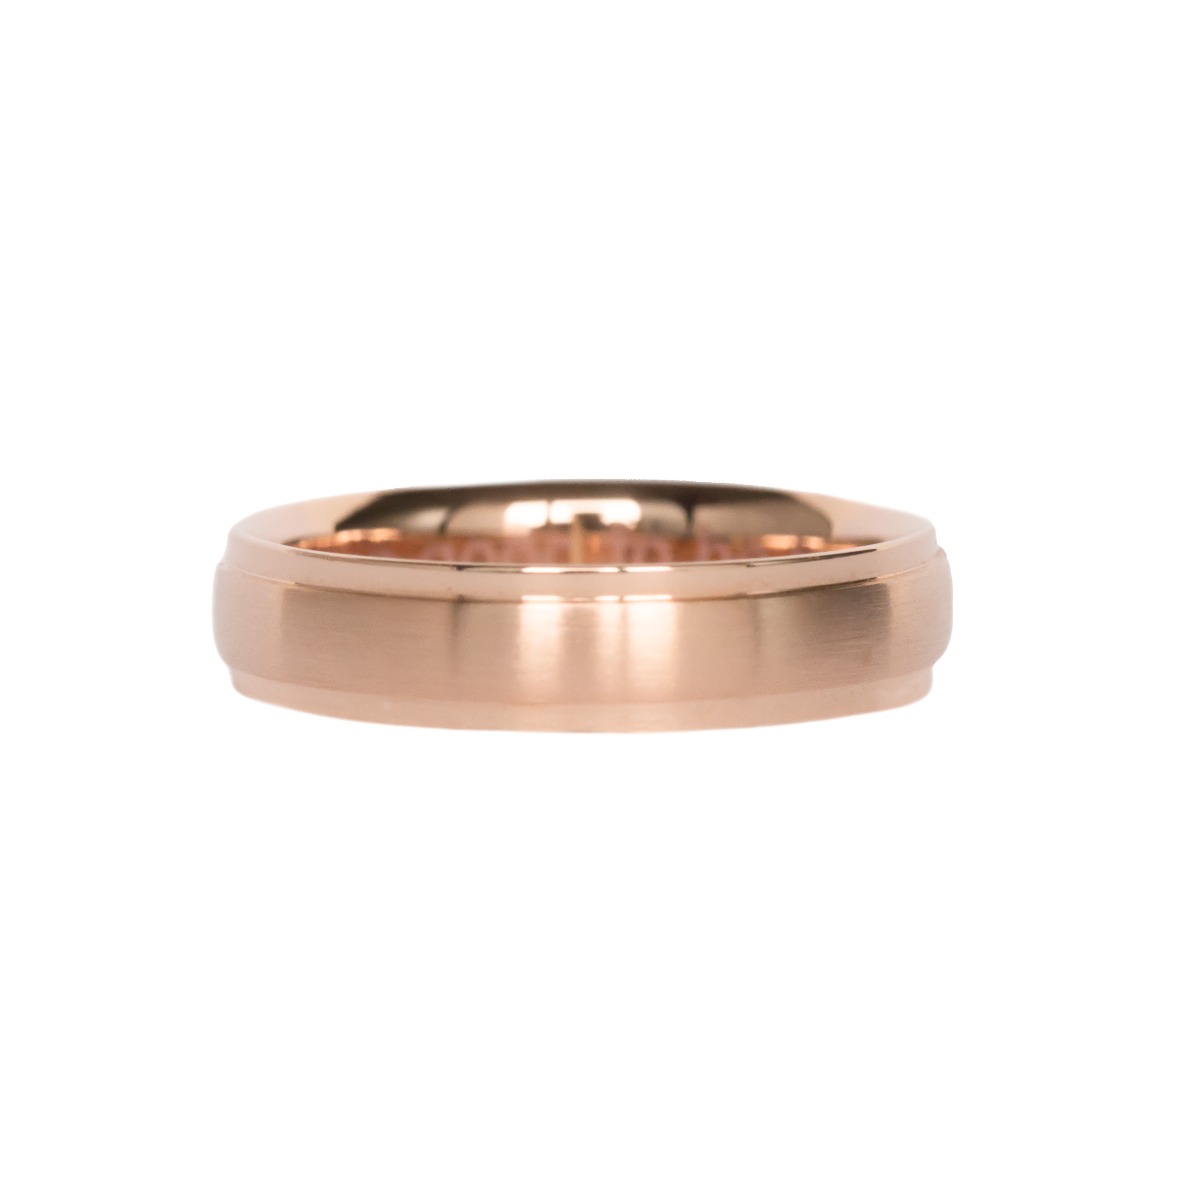 Men's Comfort Fit Wedding Band with Brushed Center and Shiny Edges in Rose Gold (5mm) 